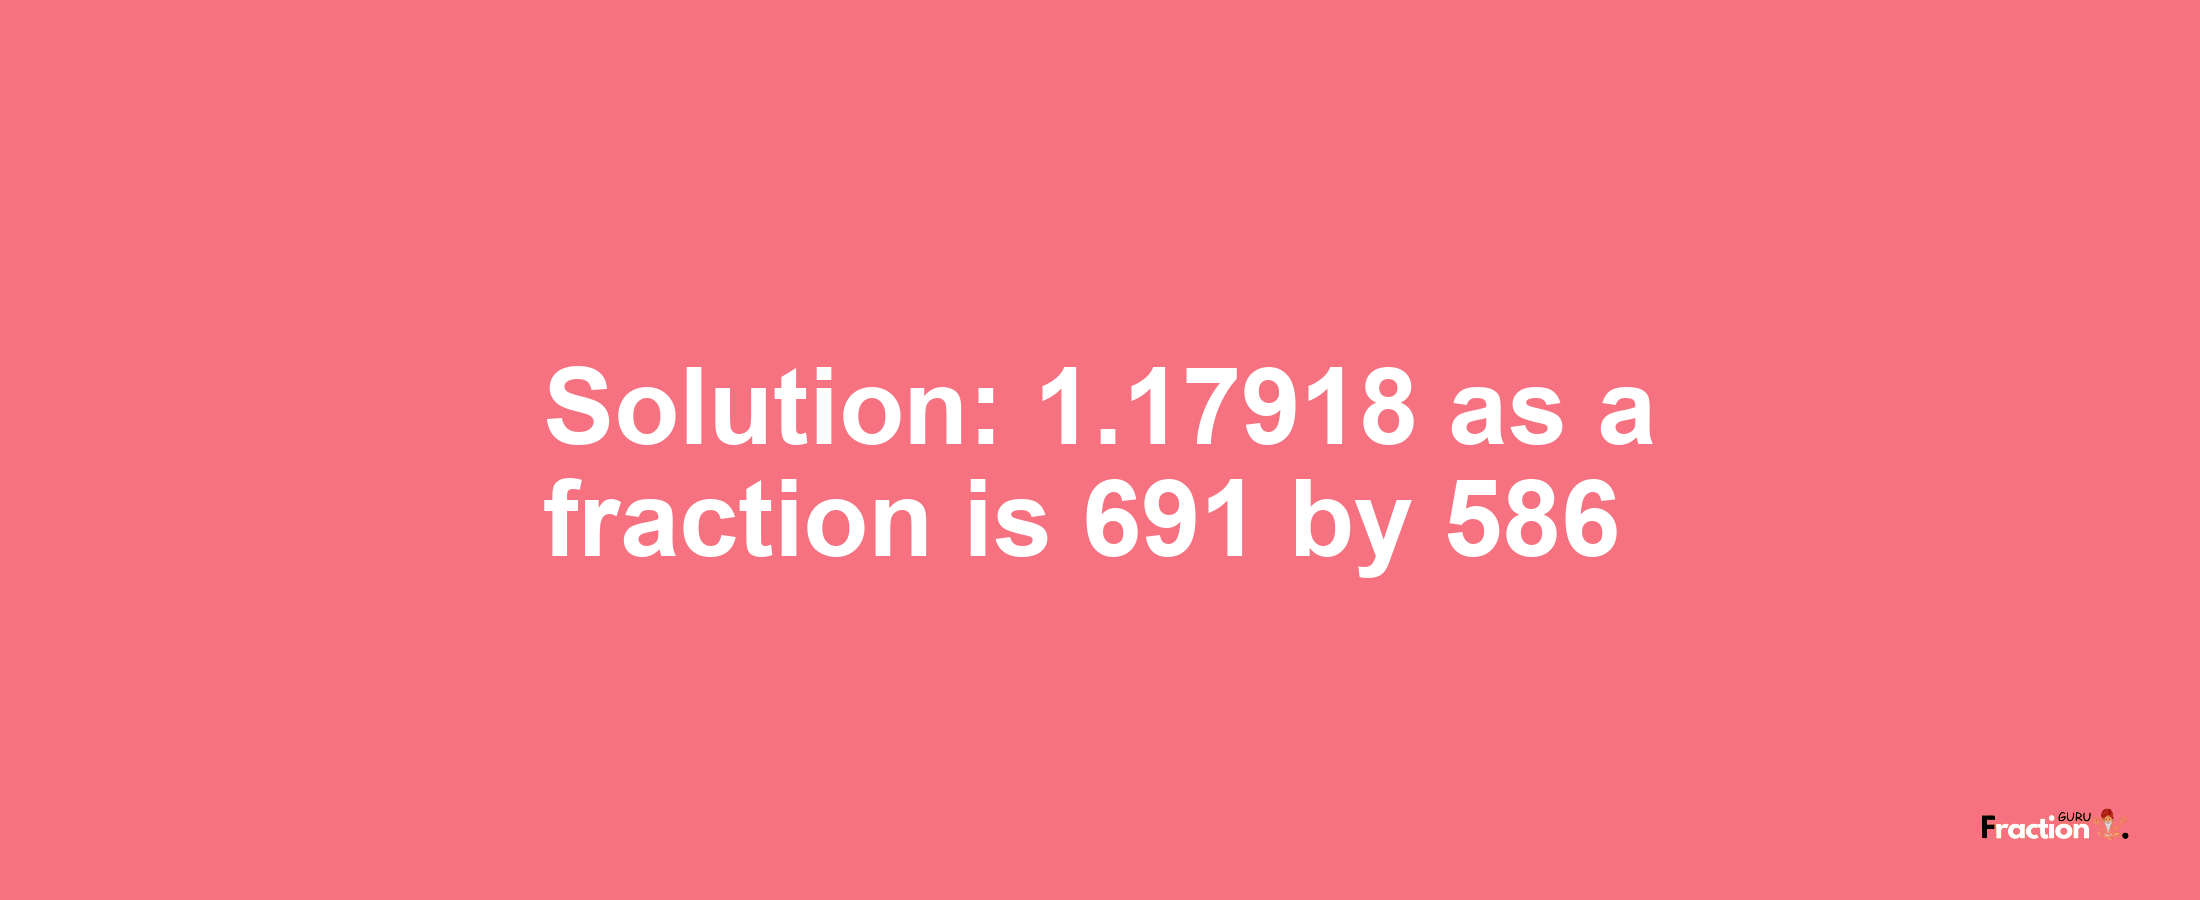 Solution:1.17918 as a fraction is 691/586